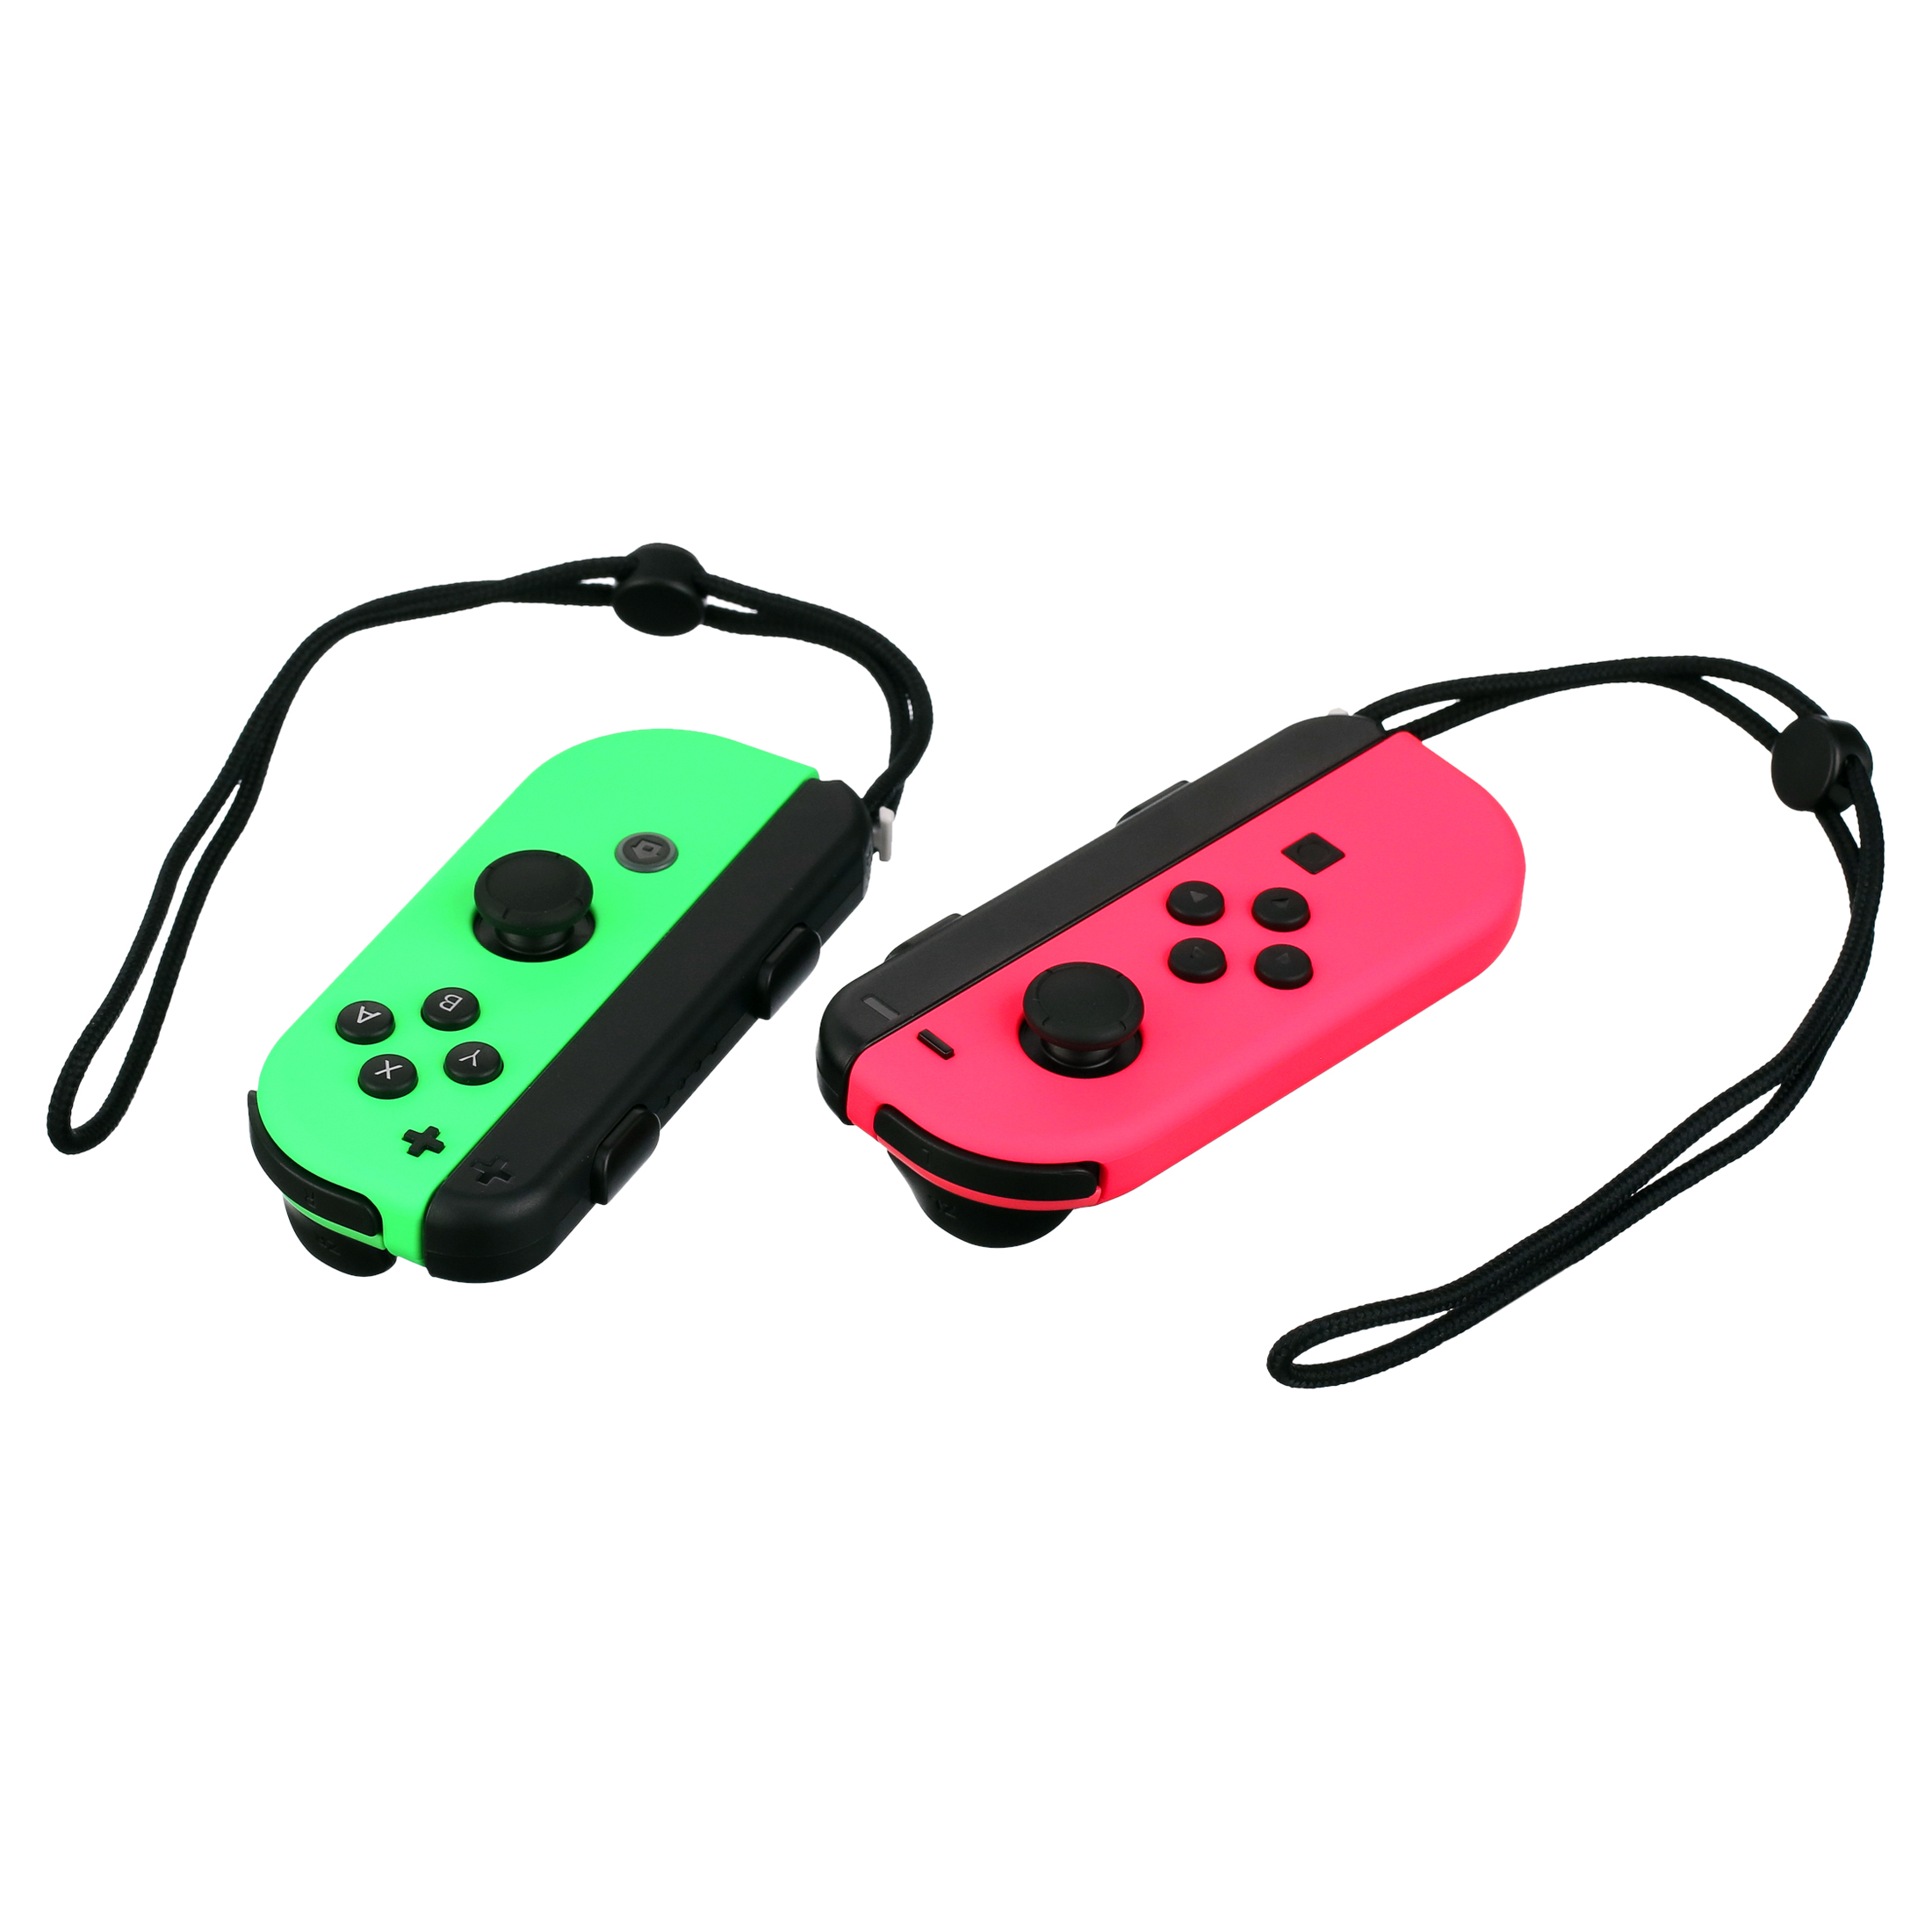 Nintendo Switch Joy-Con Pair, Neon Pink and Neon Green - image 3 of 6